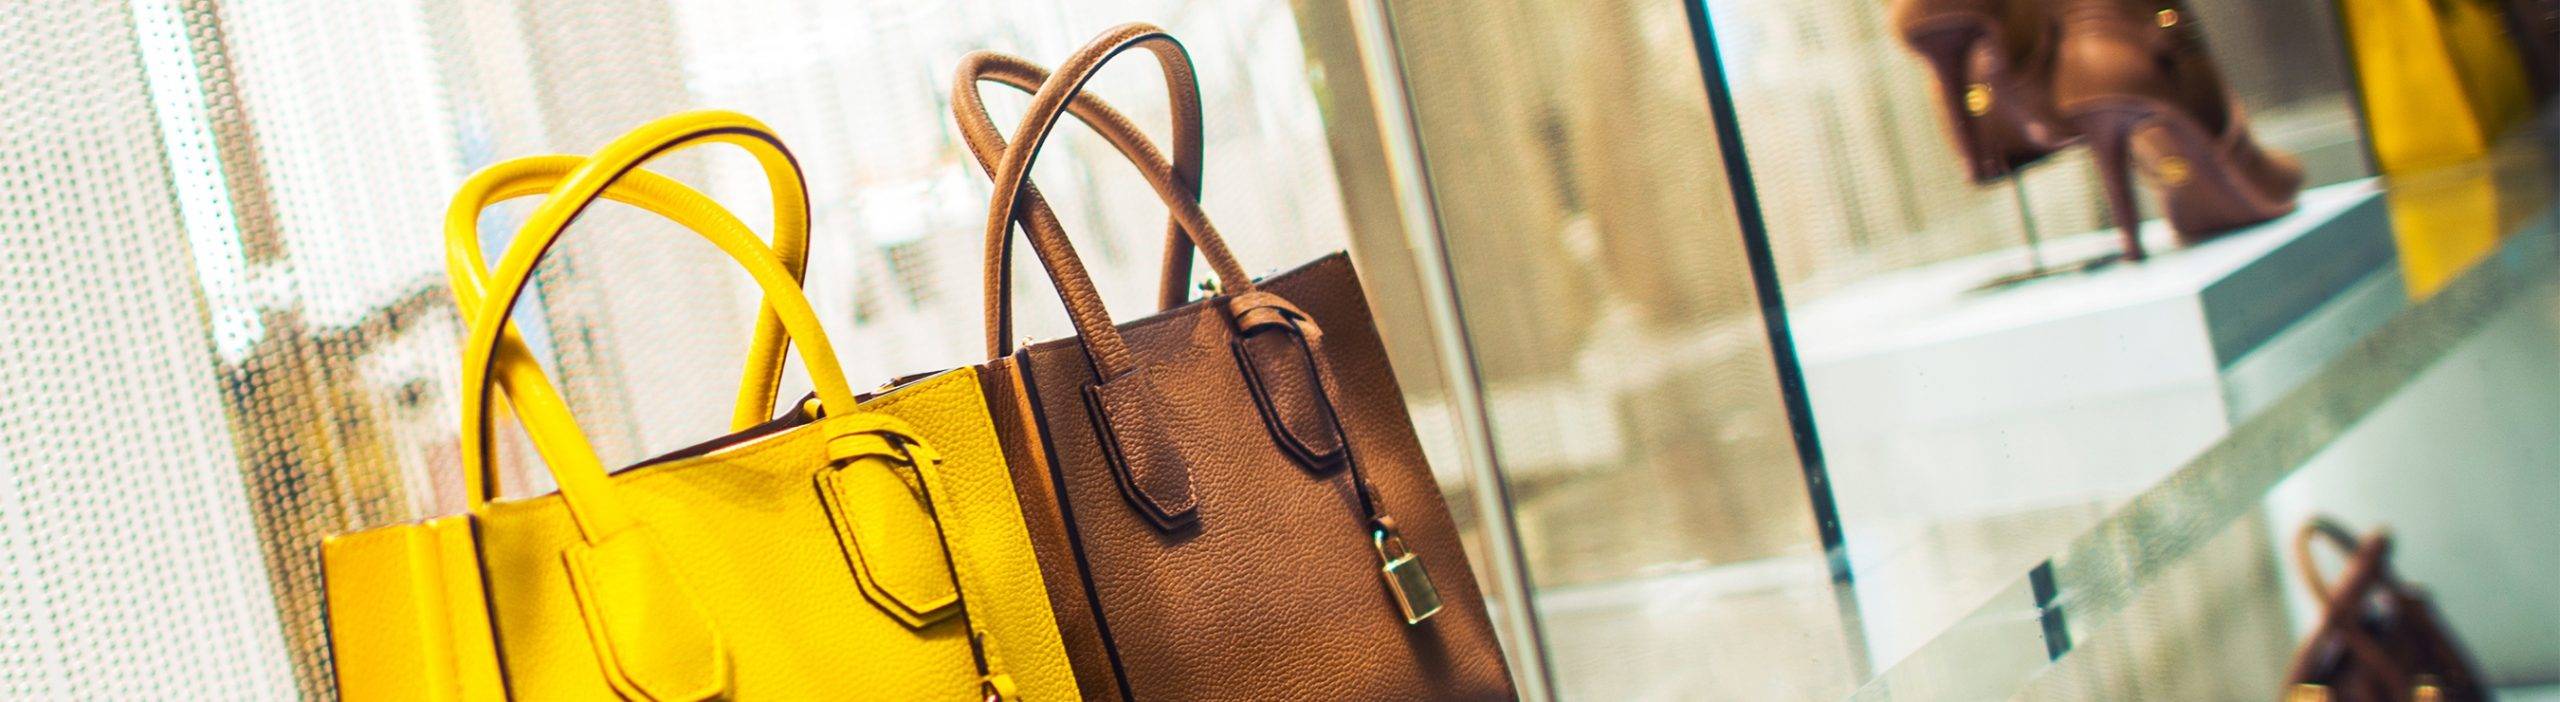 High-end fashion brands take to LINE to sell luxury goods during the  lockdown